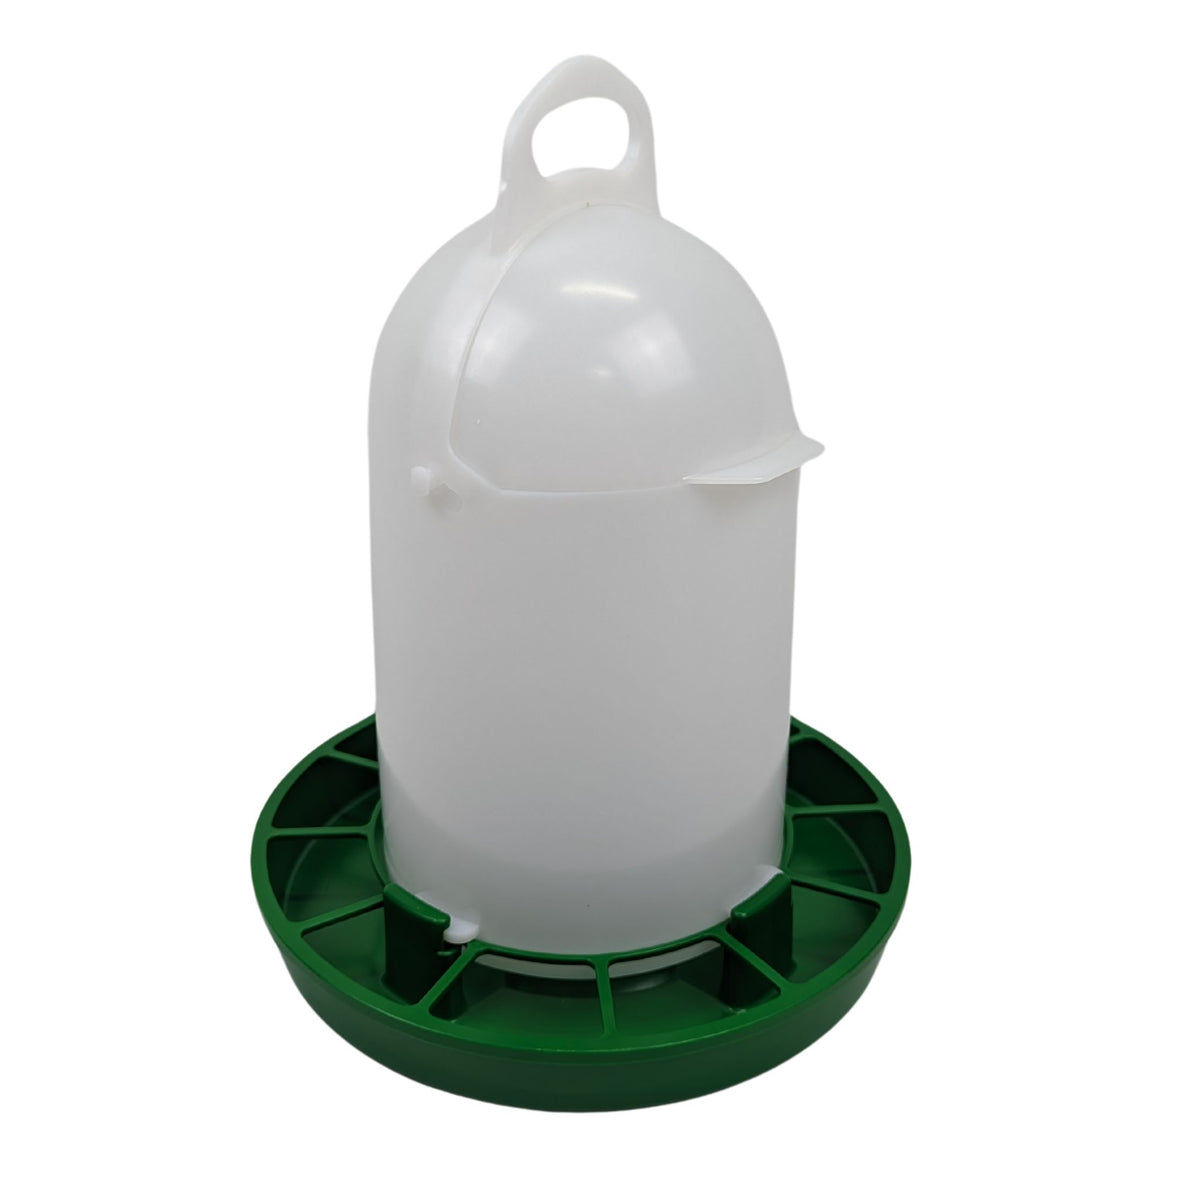 Top Fill Poultry Feeder